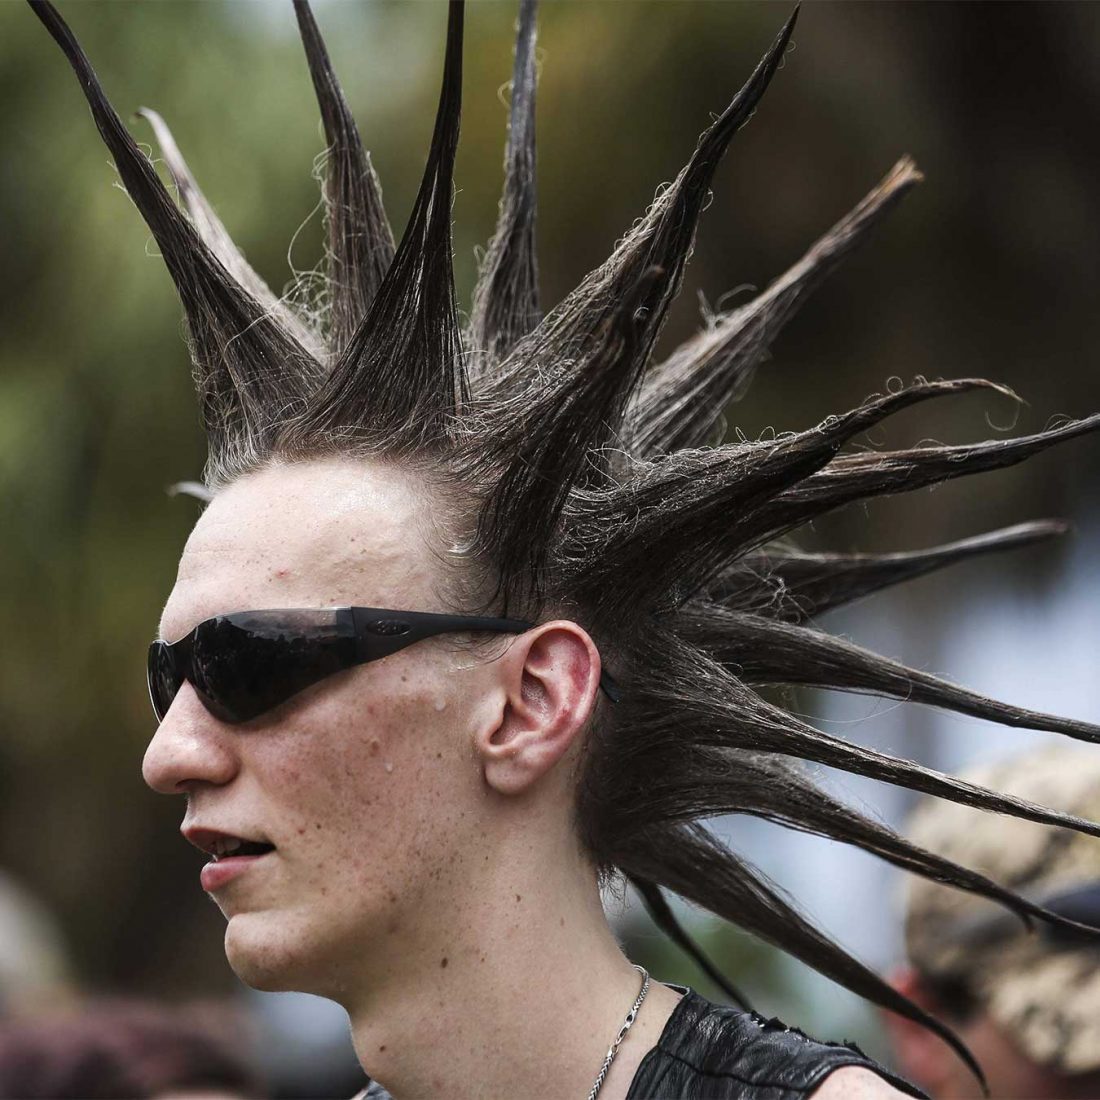 10+ Best Liberty Spikes to Rock Your Fantasy - Men's Hairstyle Tips